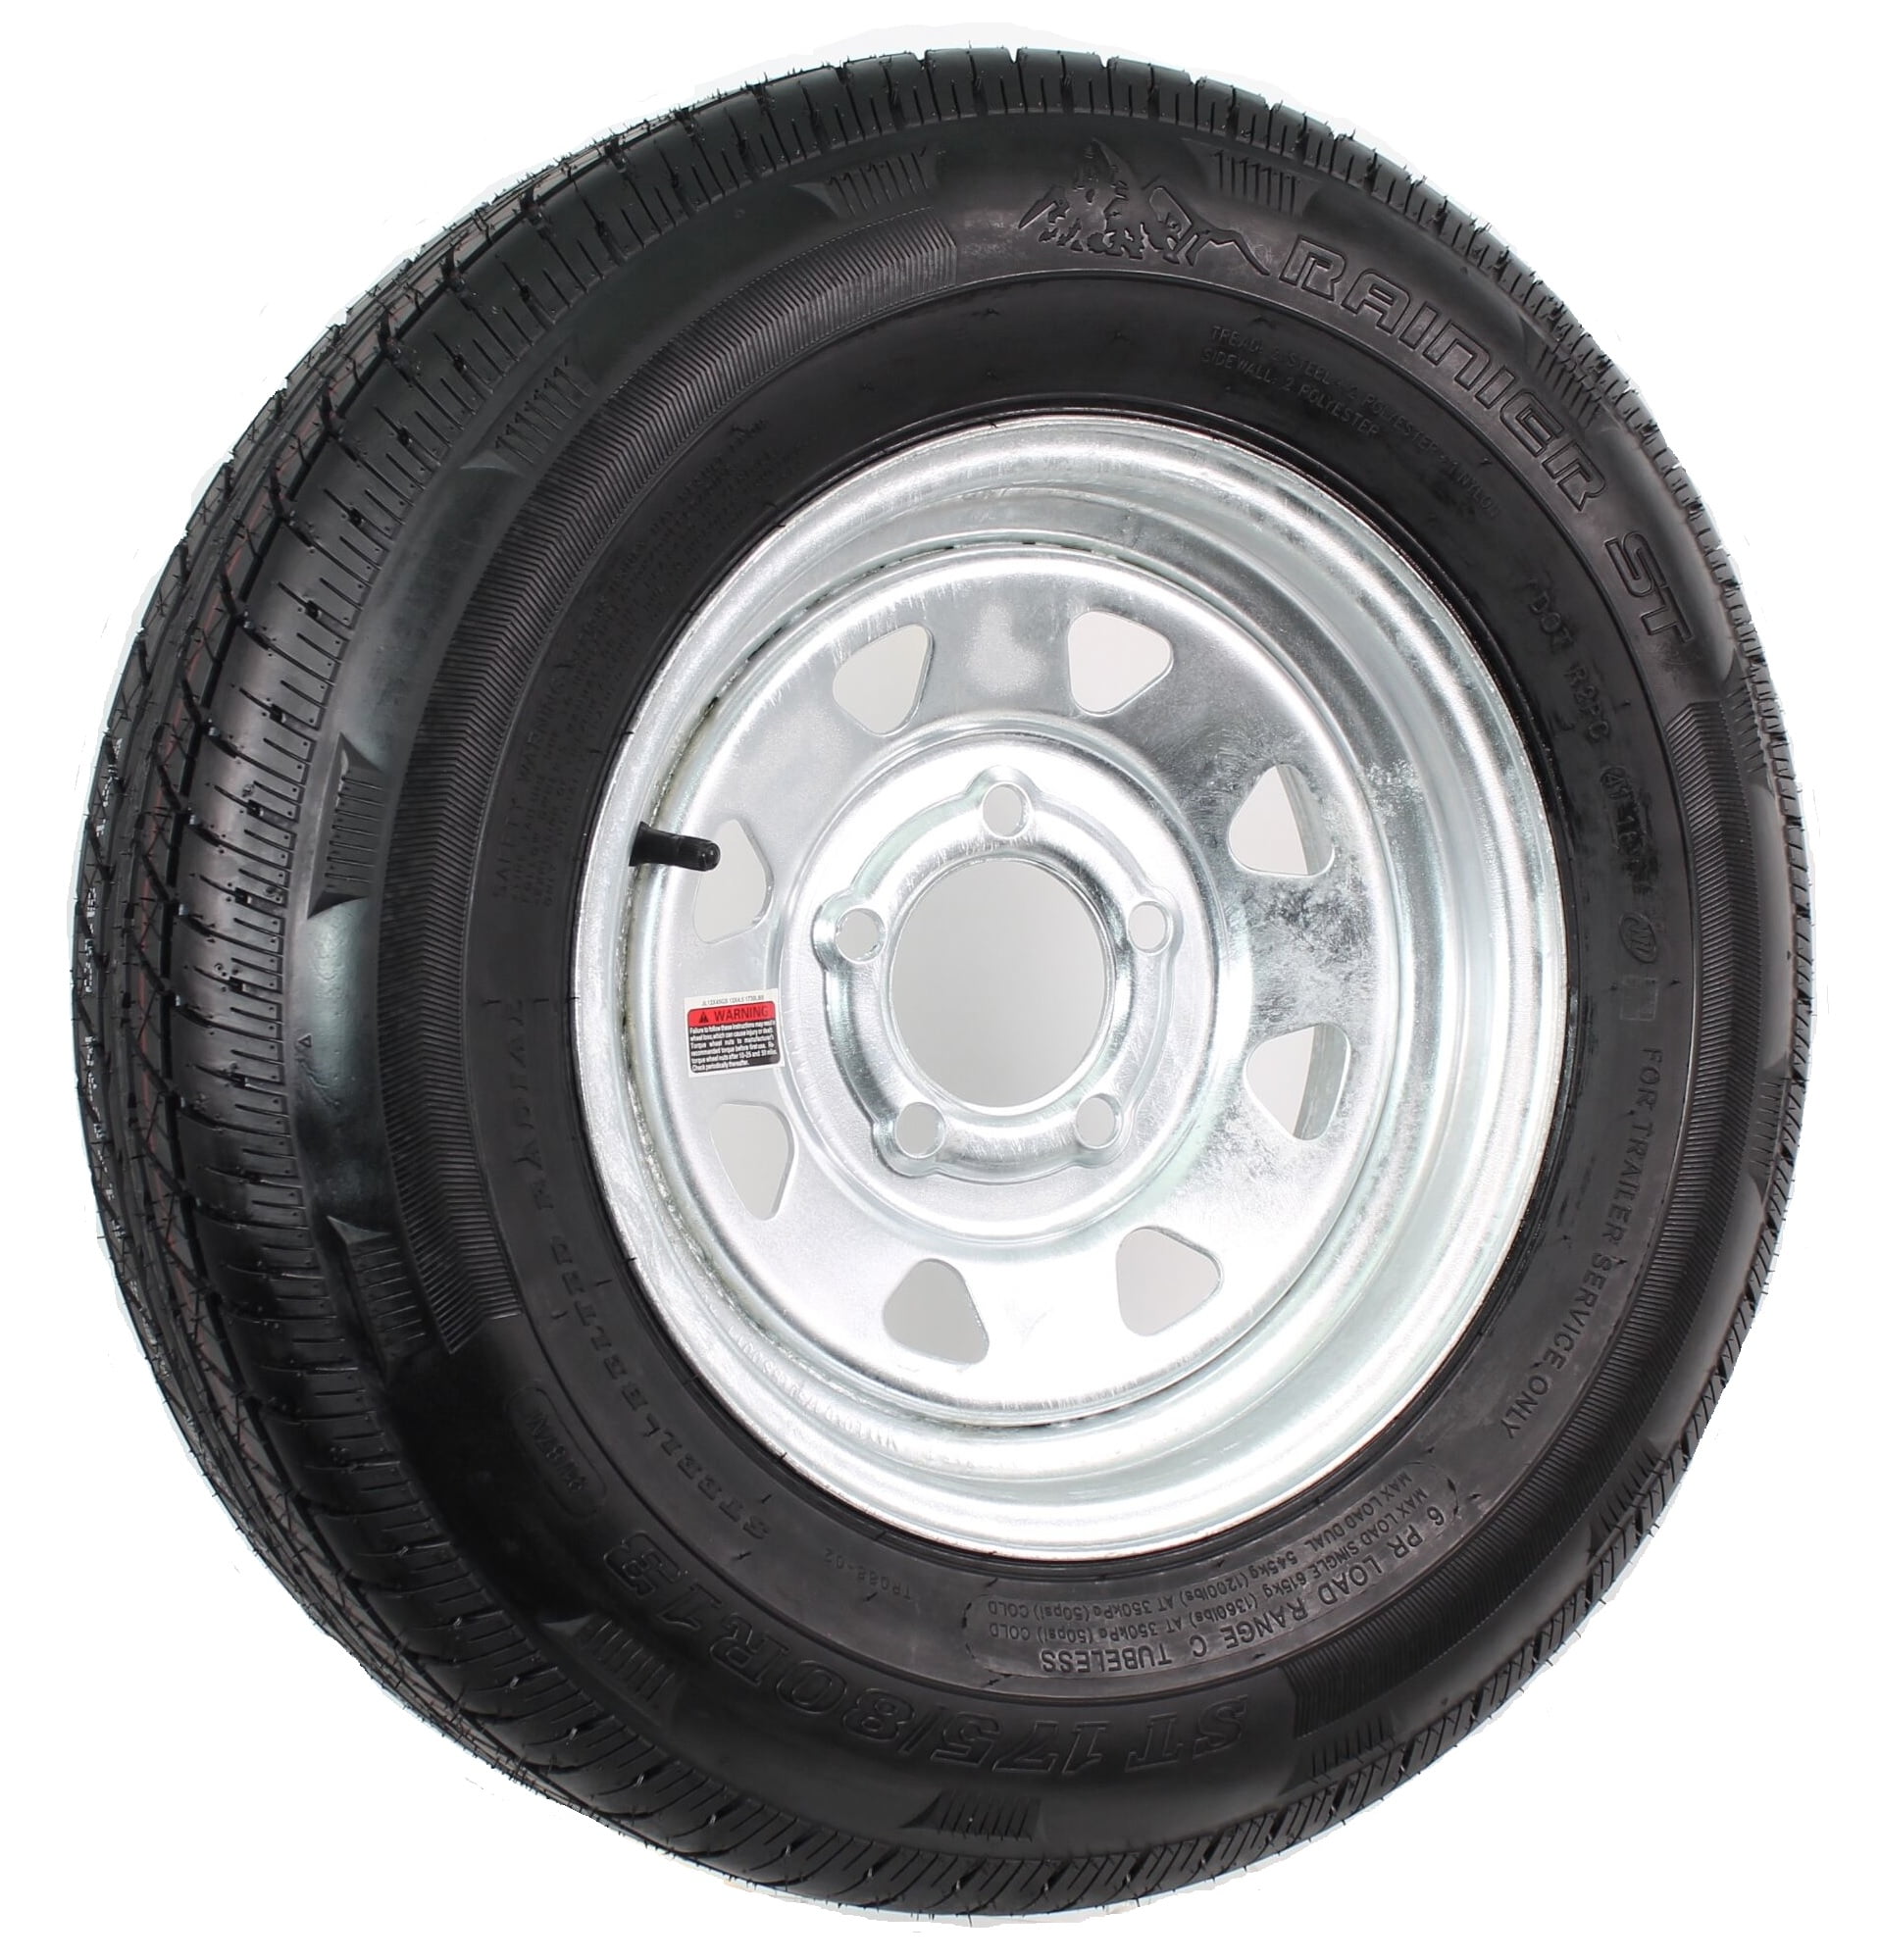 Load Range C mounted on 5 bolt GALVANIZED STEEL RIM ST175-80-R13 High Speed APPROVED NORTH AMERICA D.O.T Radial Trailer Tire 175-80-R13